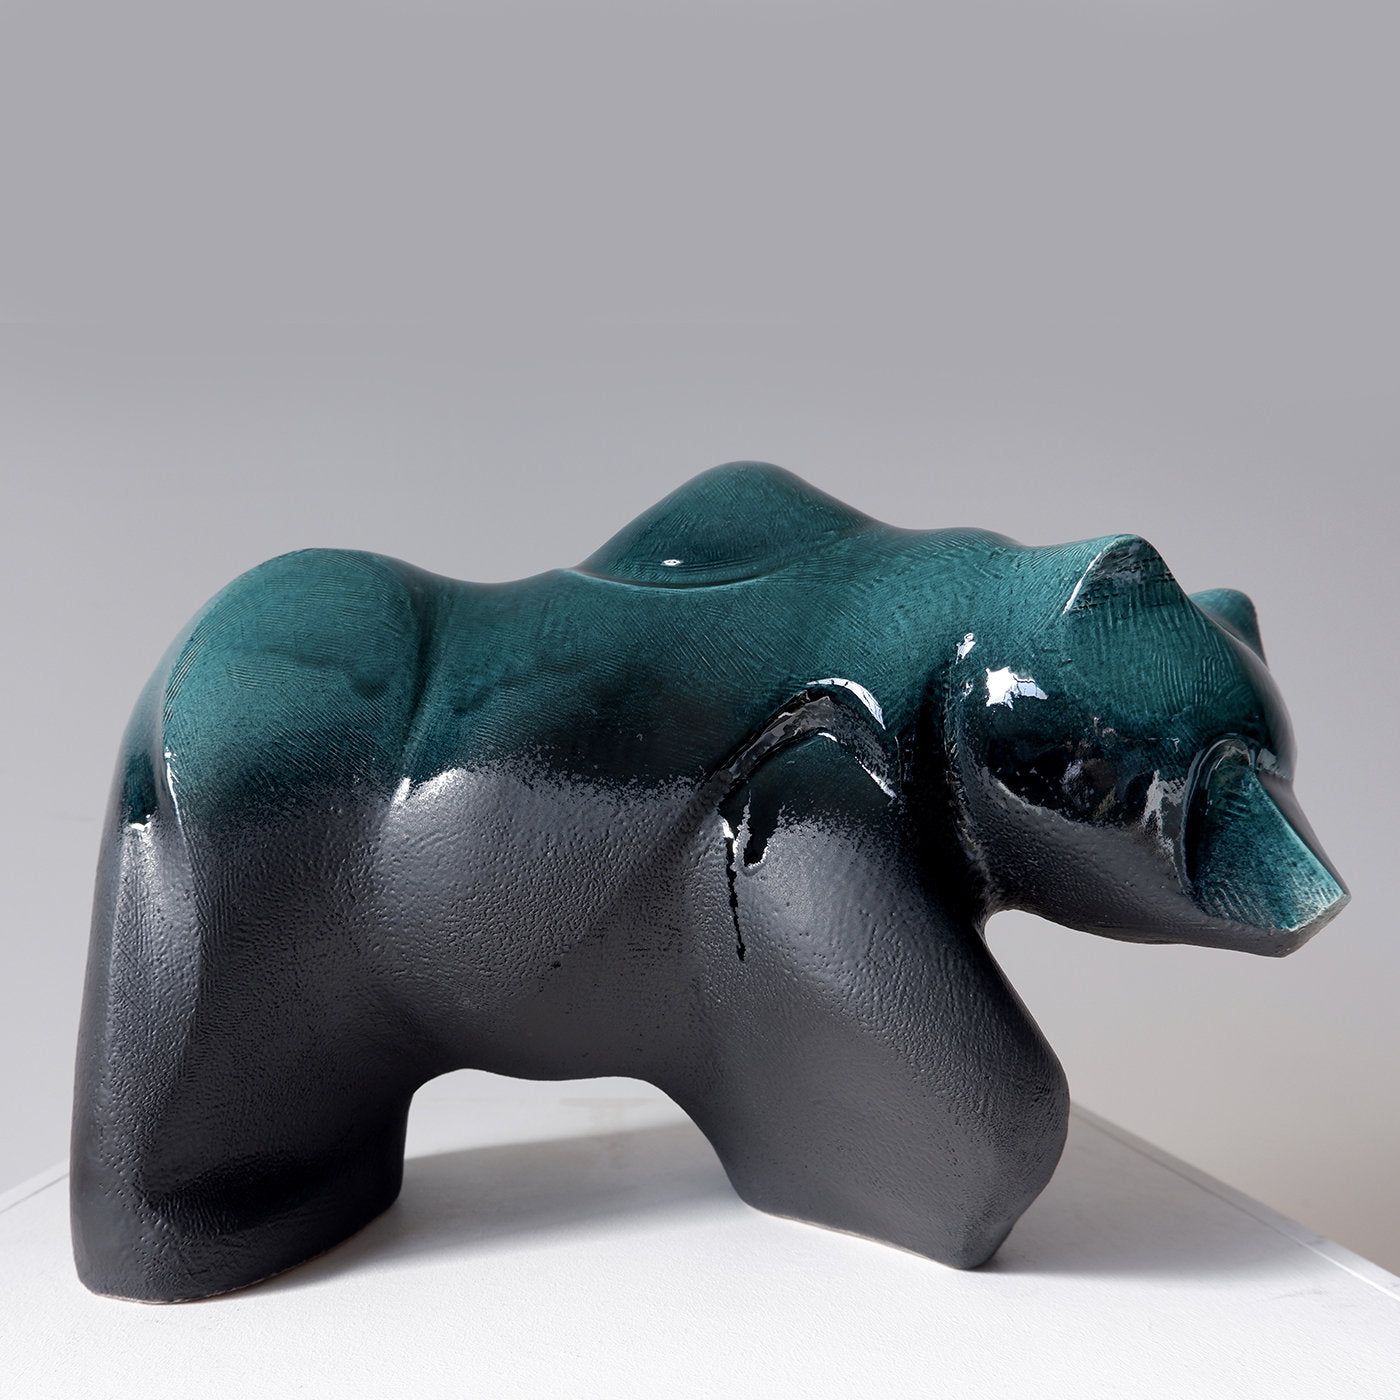 Bear Sculpture in Turquoise - Alternative view 4